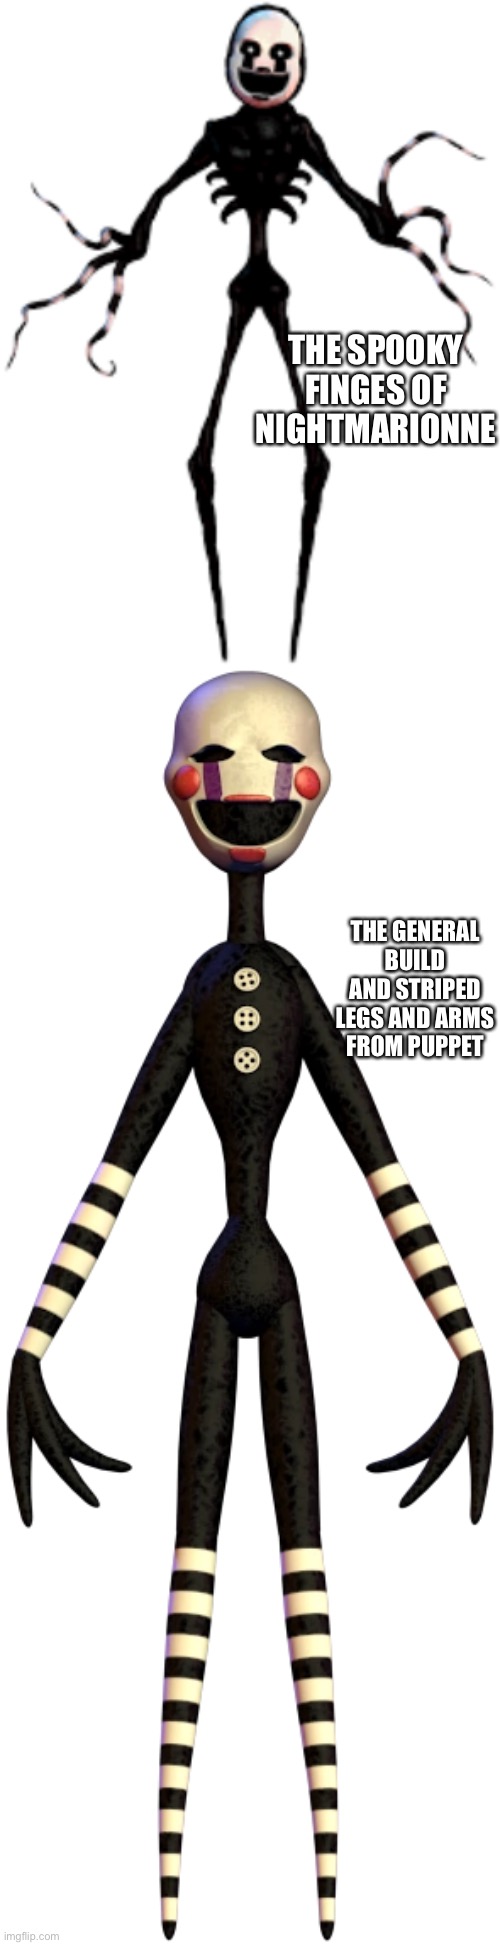 THE SPOOKY FINGES OF NIGHTMARIONNE THE GENERAL BUILD AND STRIPED LEGS AND ARMS FROM PUPPET | made w/ Imgflip meme maker